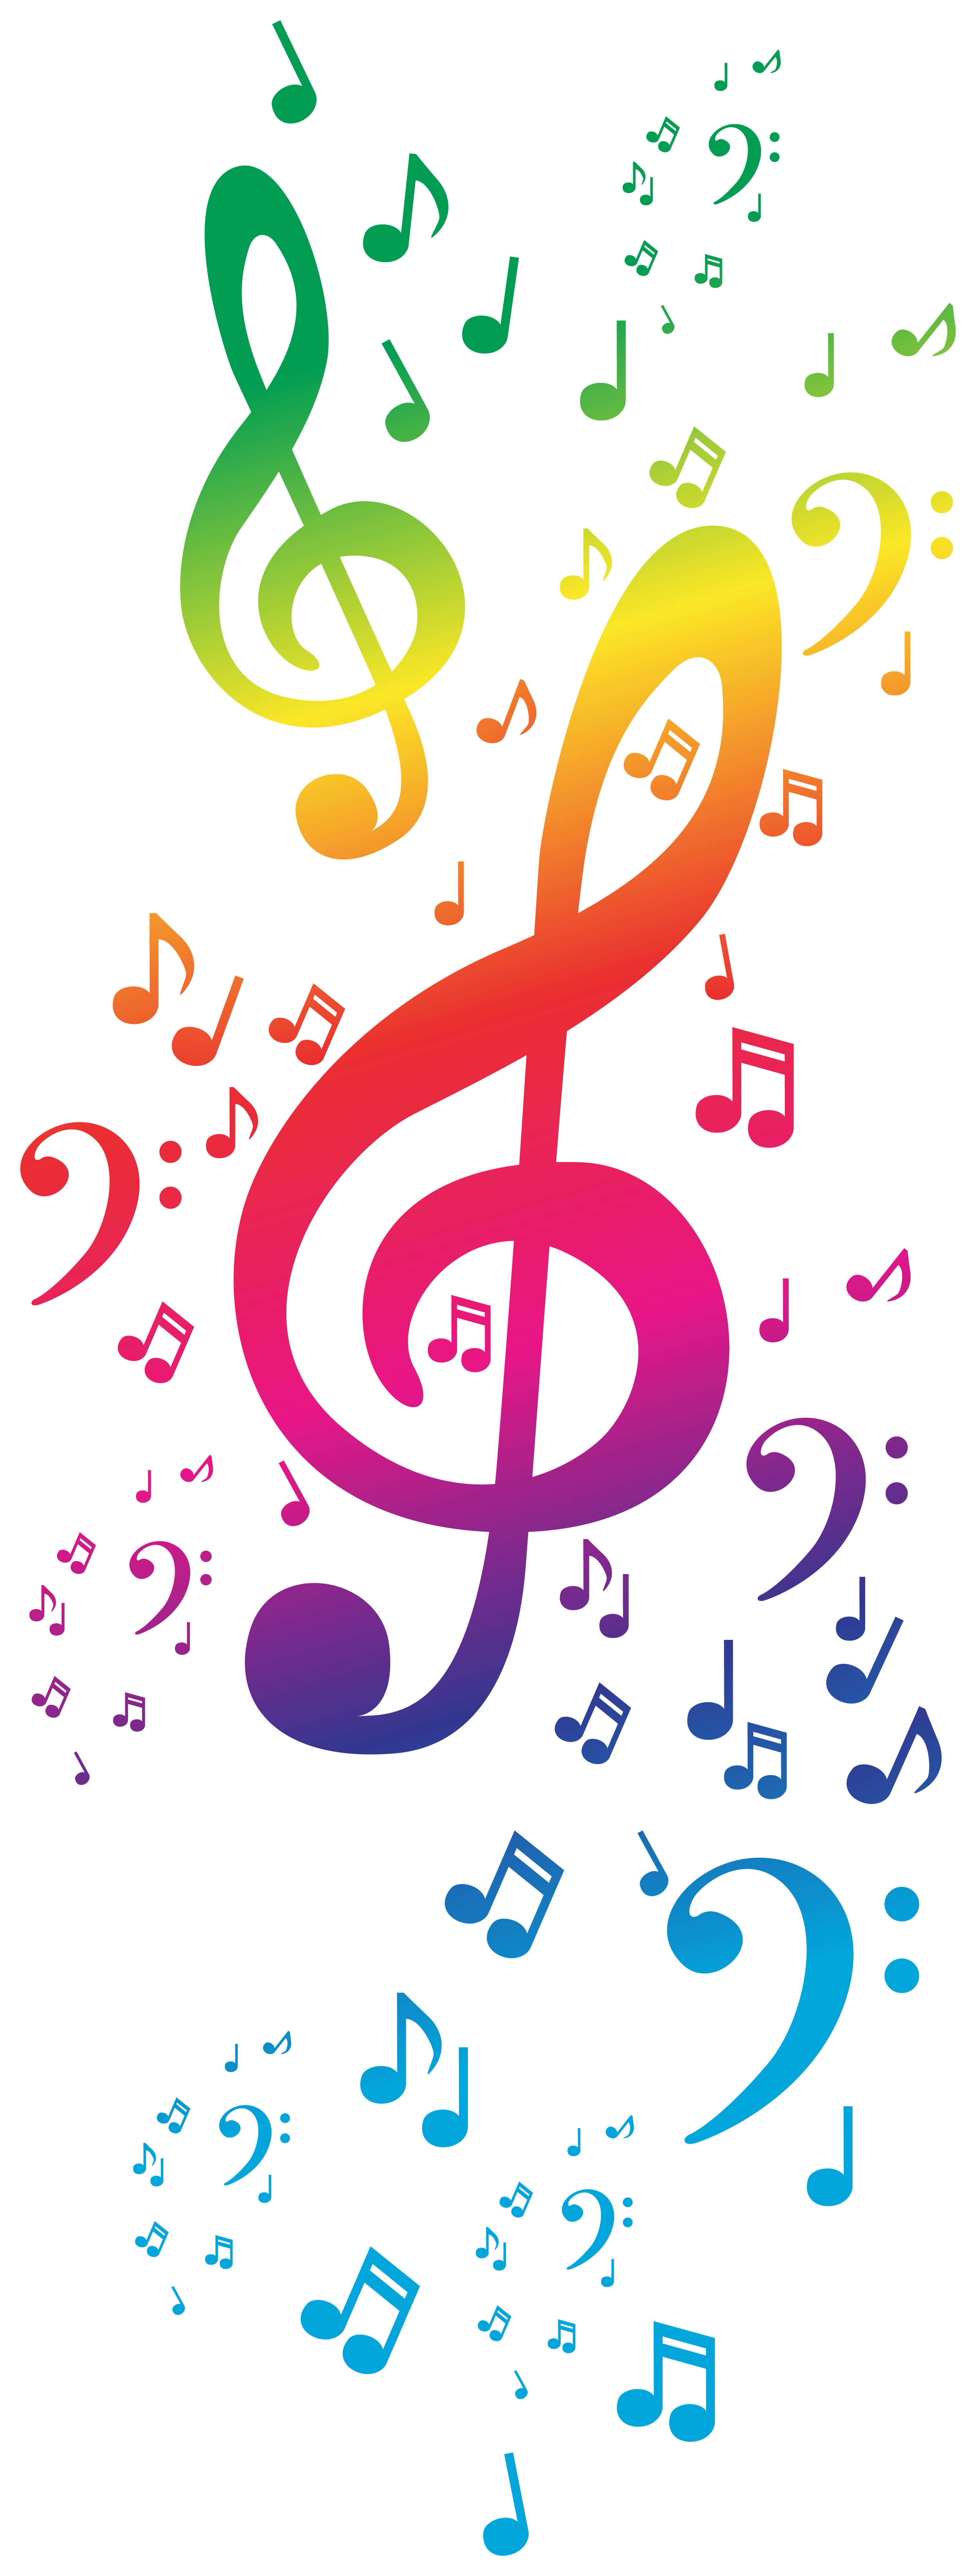 Colorful Music Notes Transparent Image.